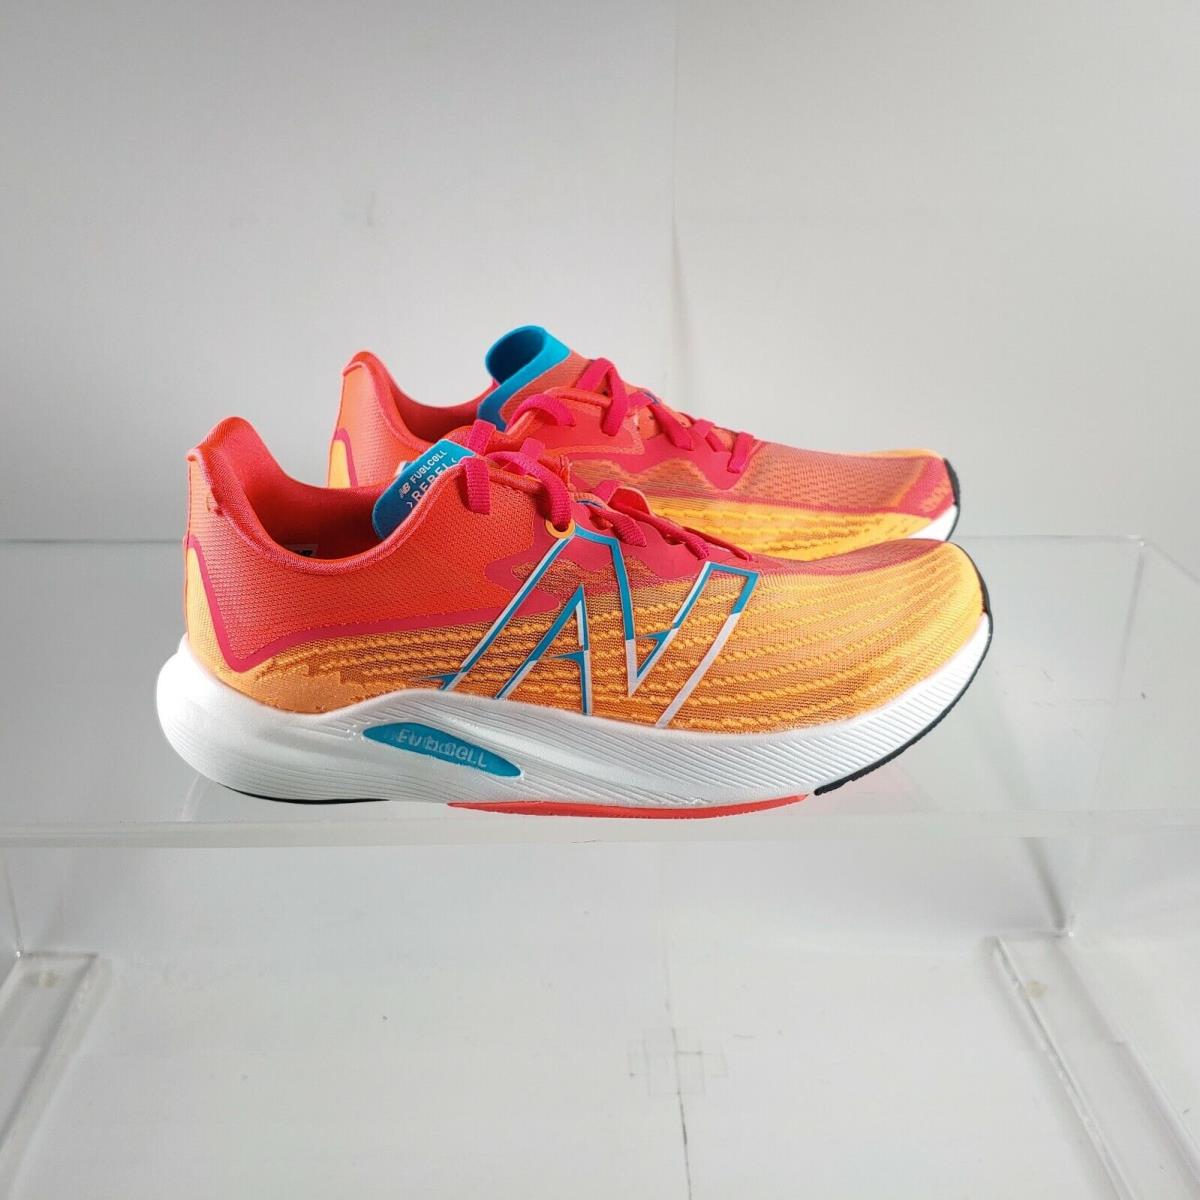 Size 7 Wide D Women`s New Balance Fuelcell Rebel V2 Running Shoes Orange